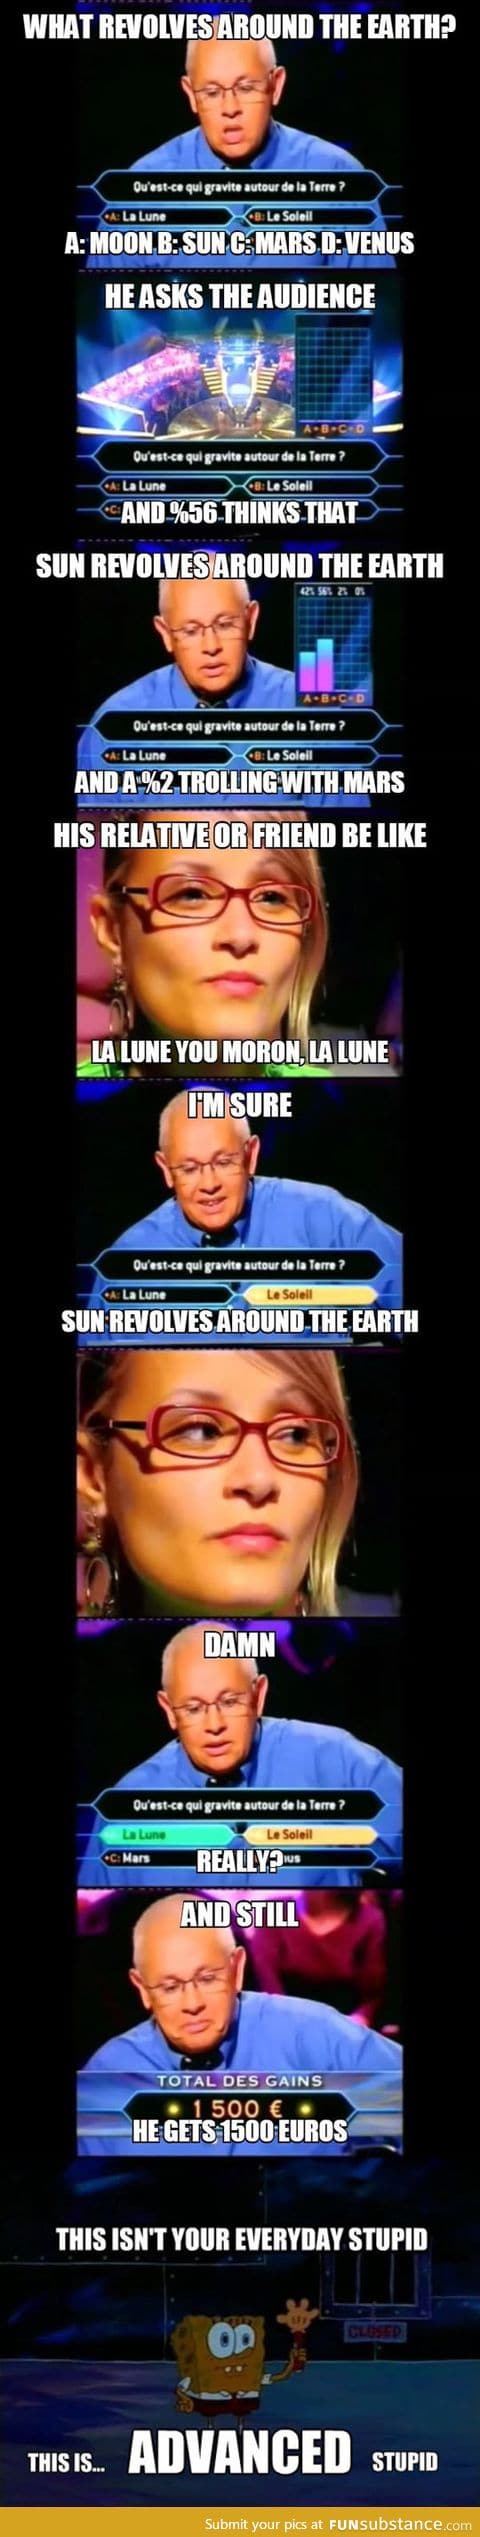 A Whole New Level of Stupidity on 'Who Wants to Be a Millionaire?'